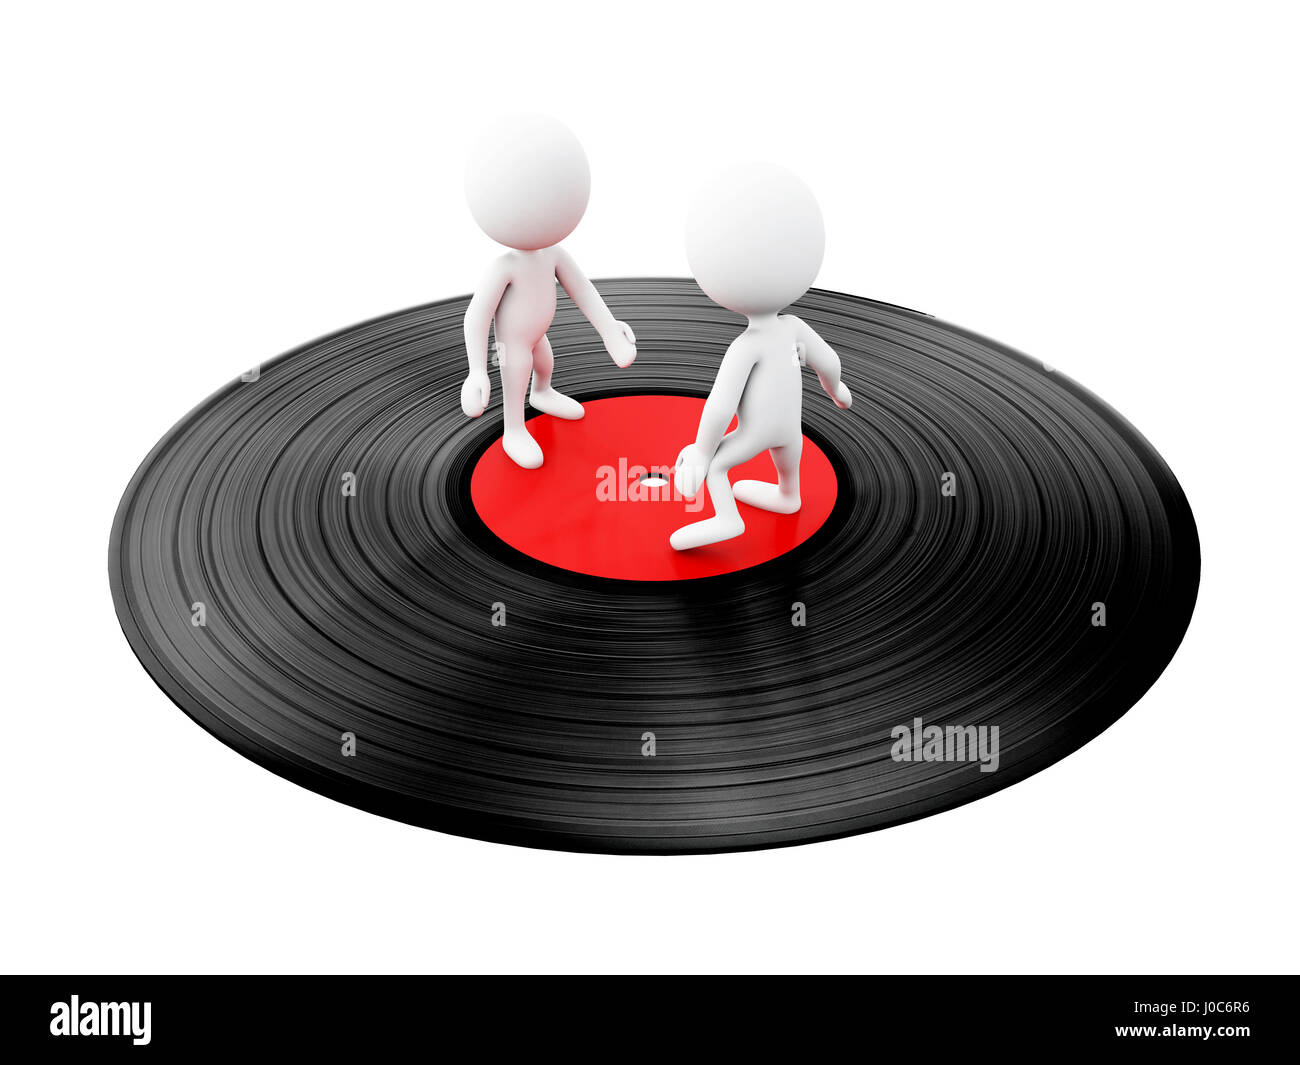 3d illustration. White people dancing on vinyl disc. Isolated white background Stock Photo